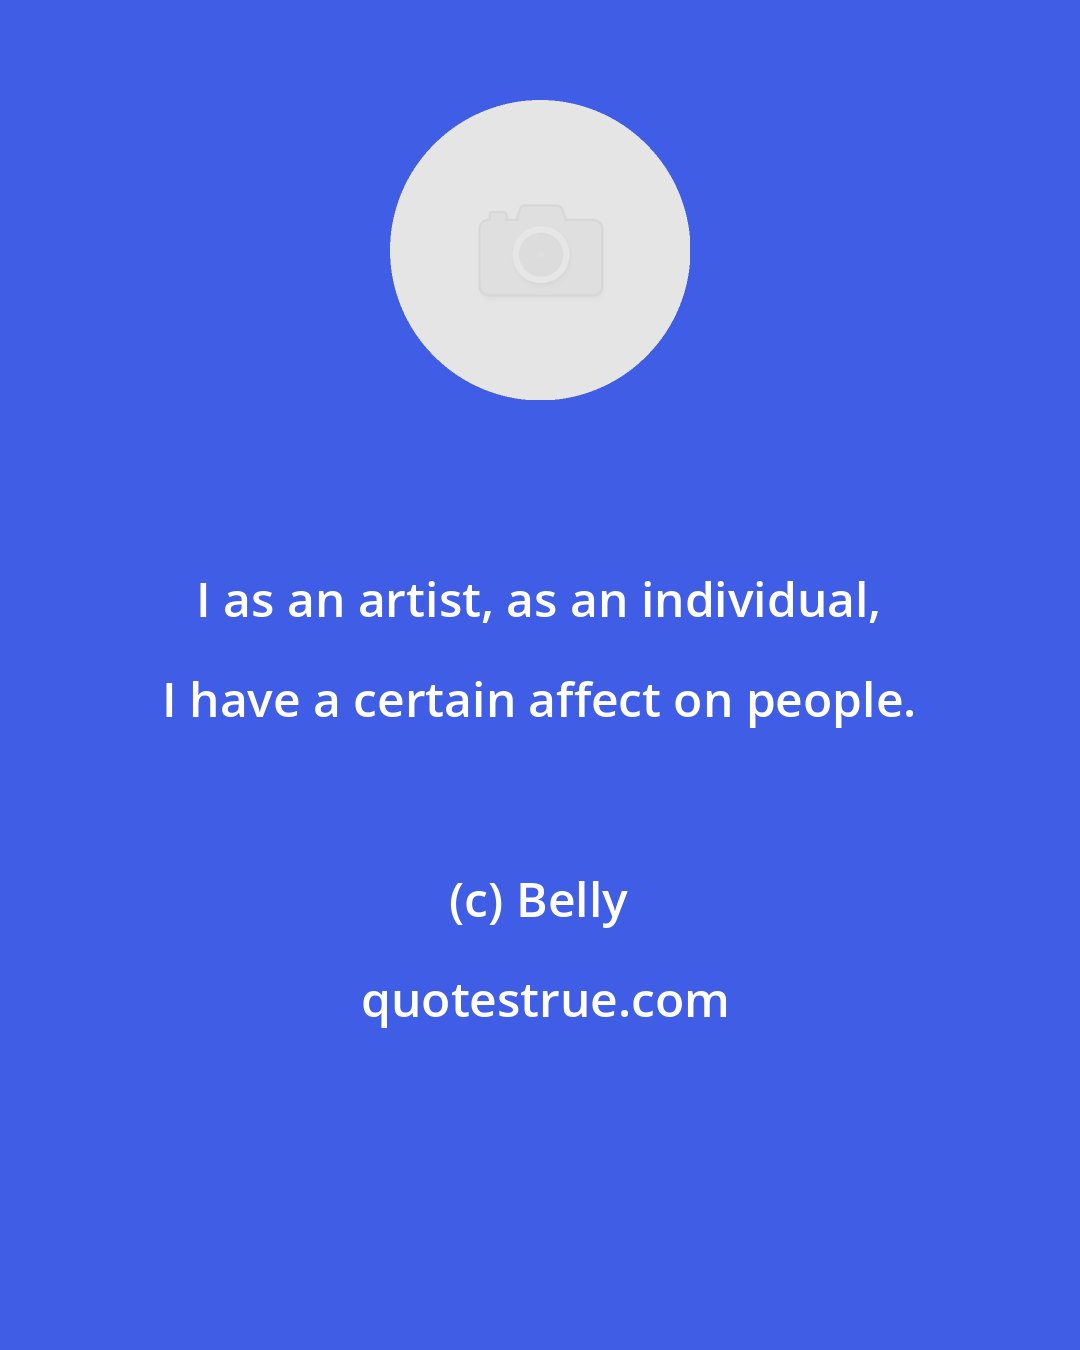 Belly: I as an artist, as an individual, I have a certain affect on people.